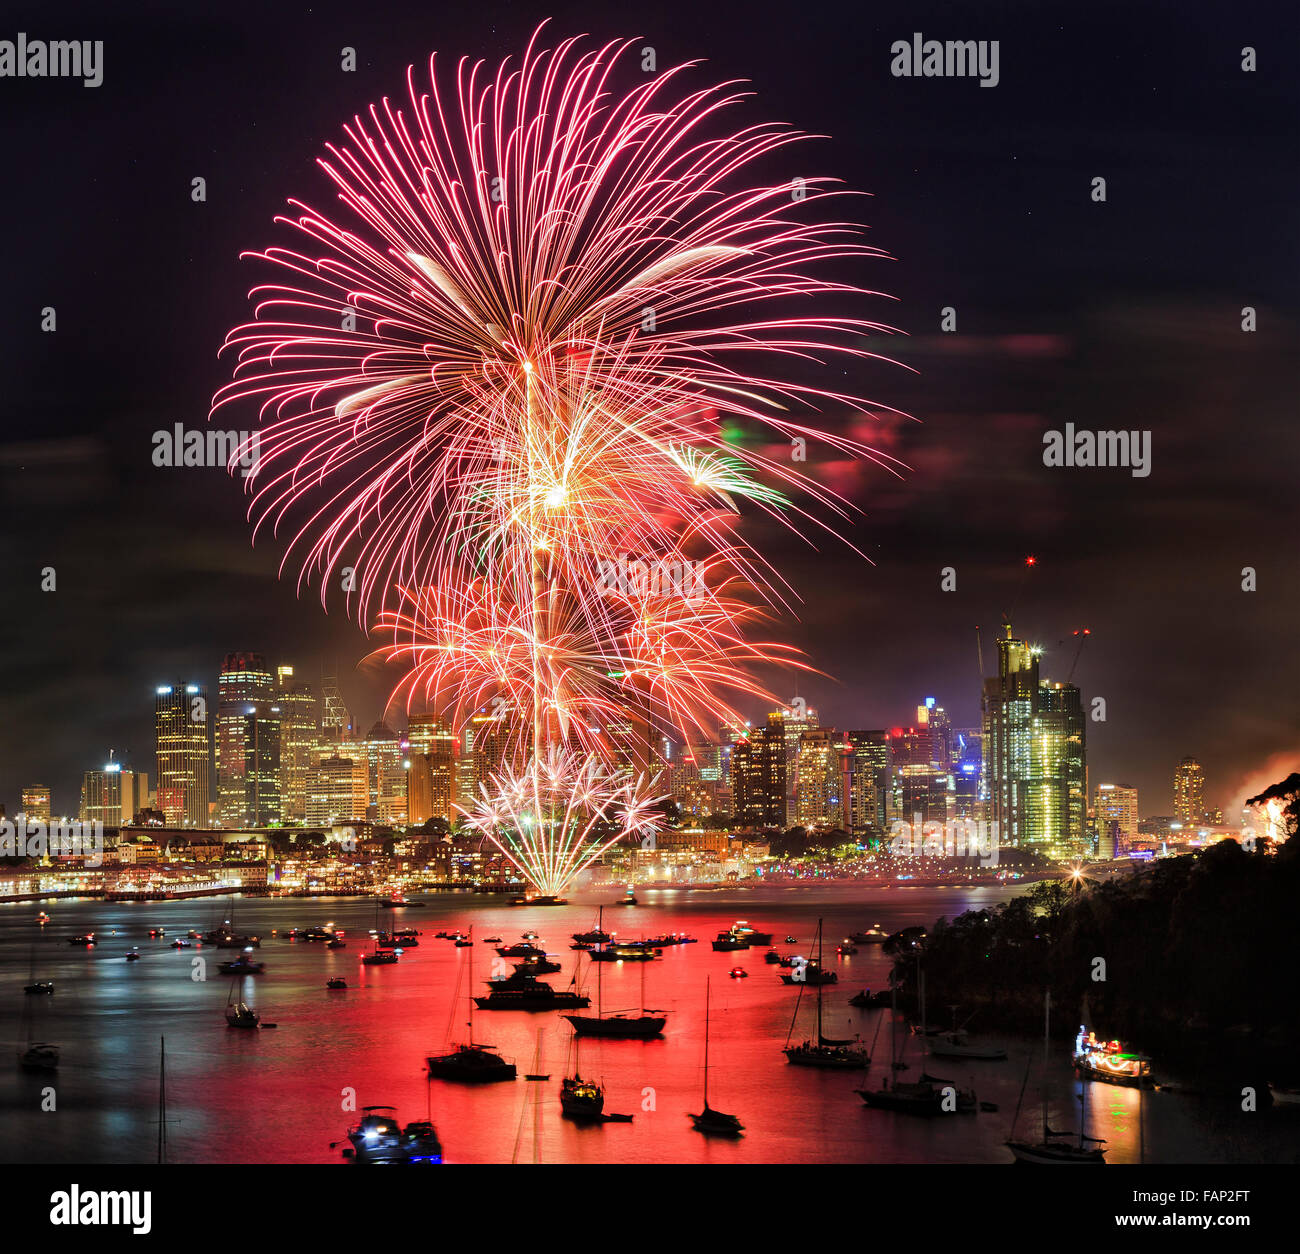 New year fireworks in Sydney from elevated lookout at Berrys bay over Sydney harbour with CBD skyscrapers under flash balls Stock Photo